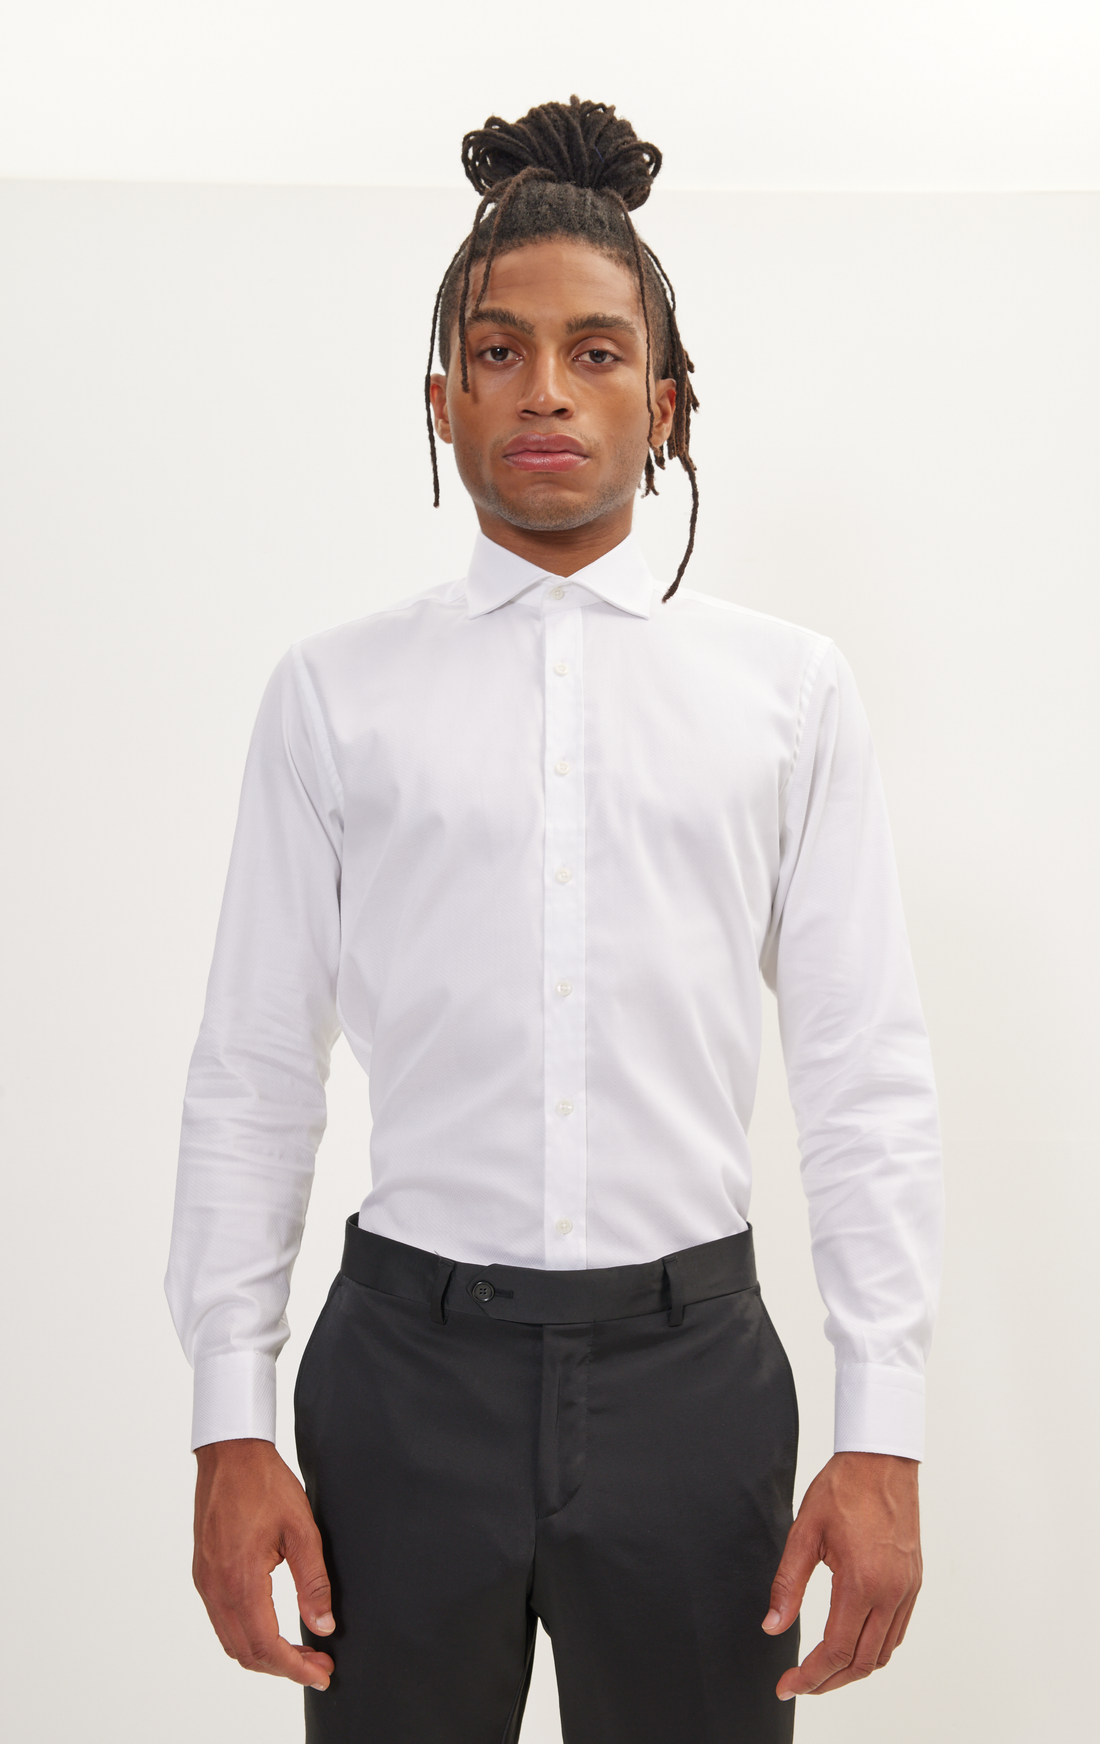 N° 4802A PURE COTTON FRONT PLACKET SPREAD COLLAR DRESS SHIRT - WHITE